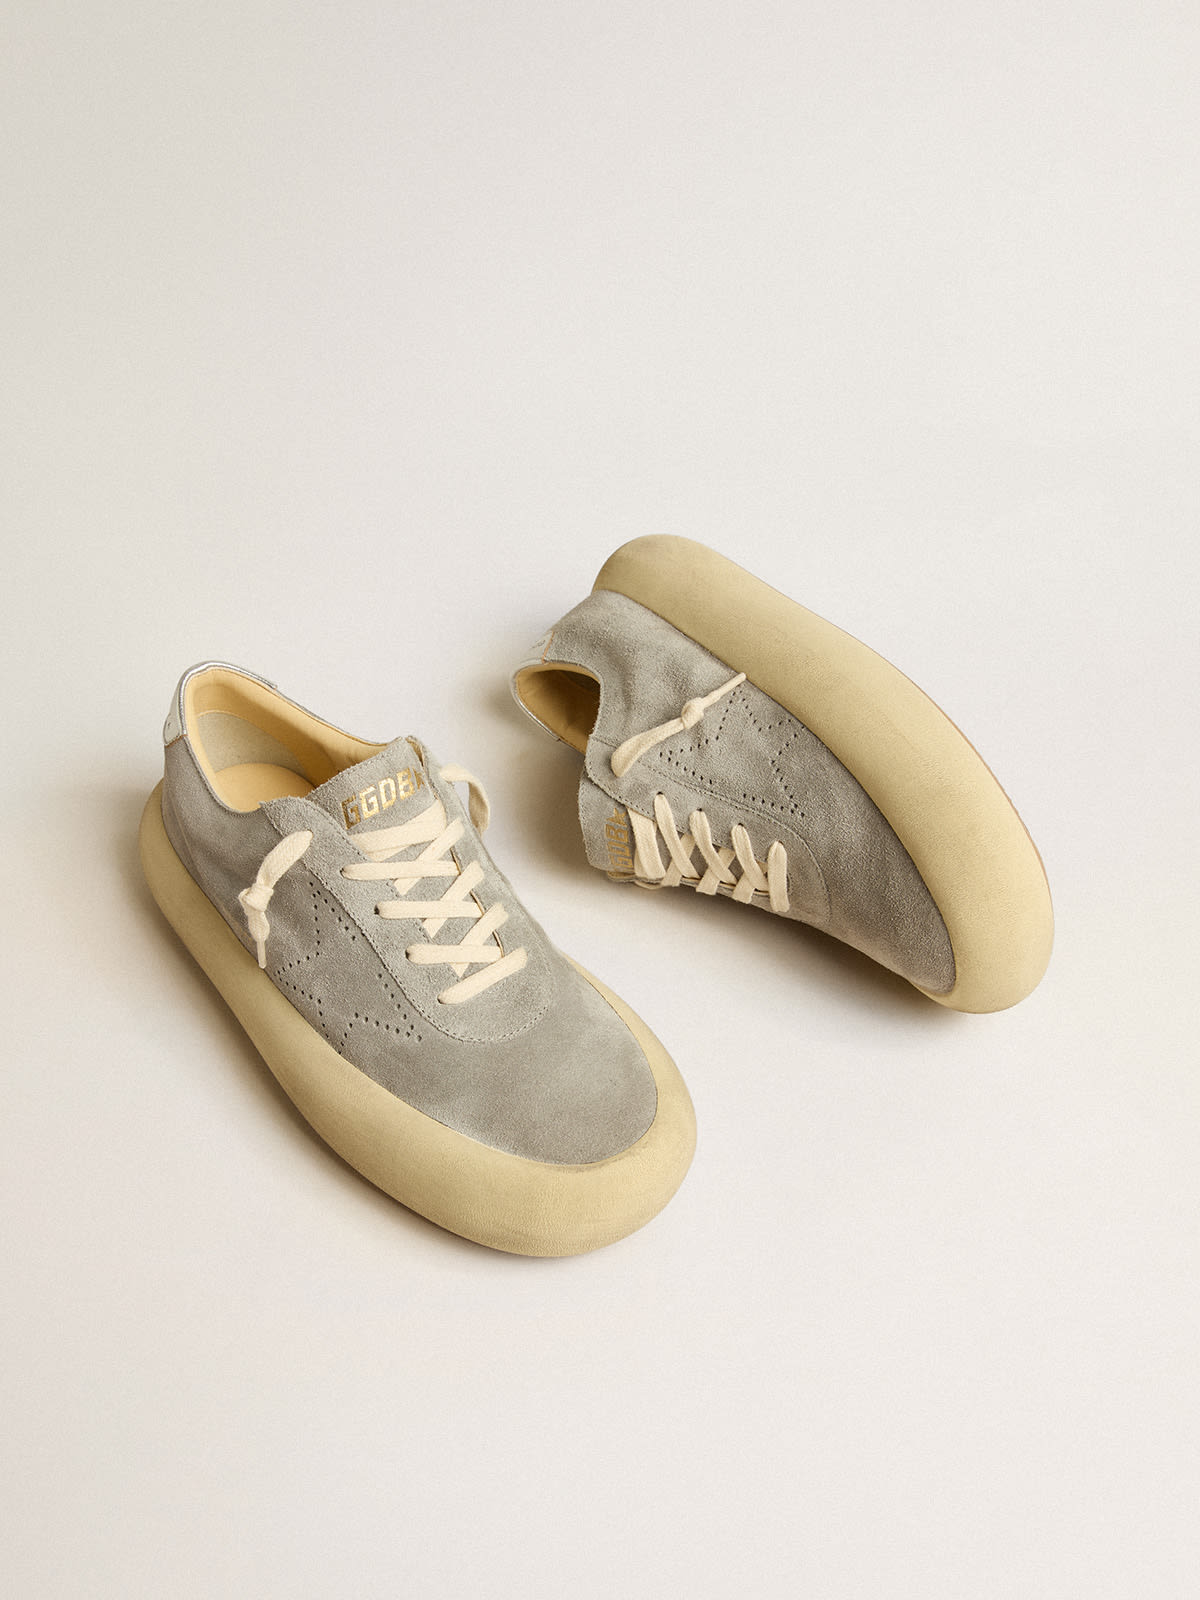 Golden Goose - Women's Space-Star shoes in ice-gray suede with perforated star in 